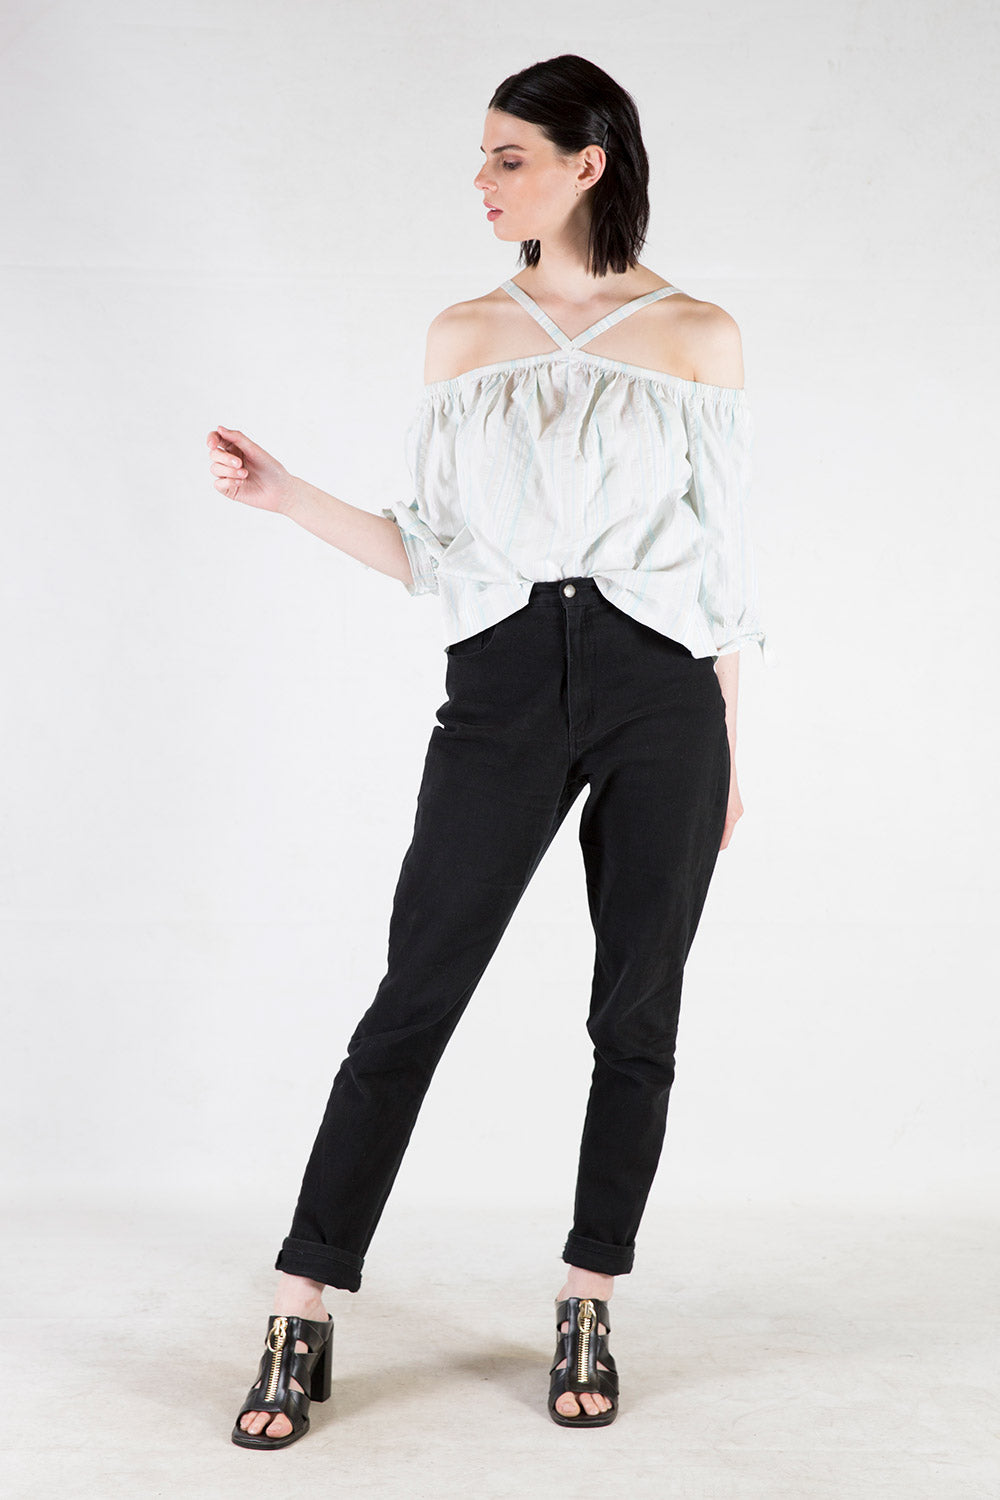 George Off The Shoulder Top | Young + Resolute | Annah Stretton